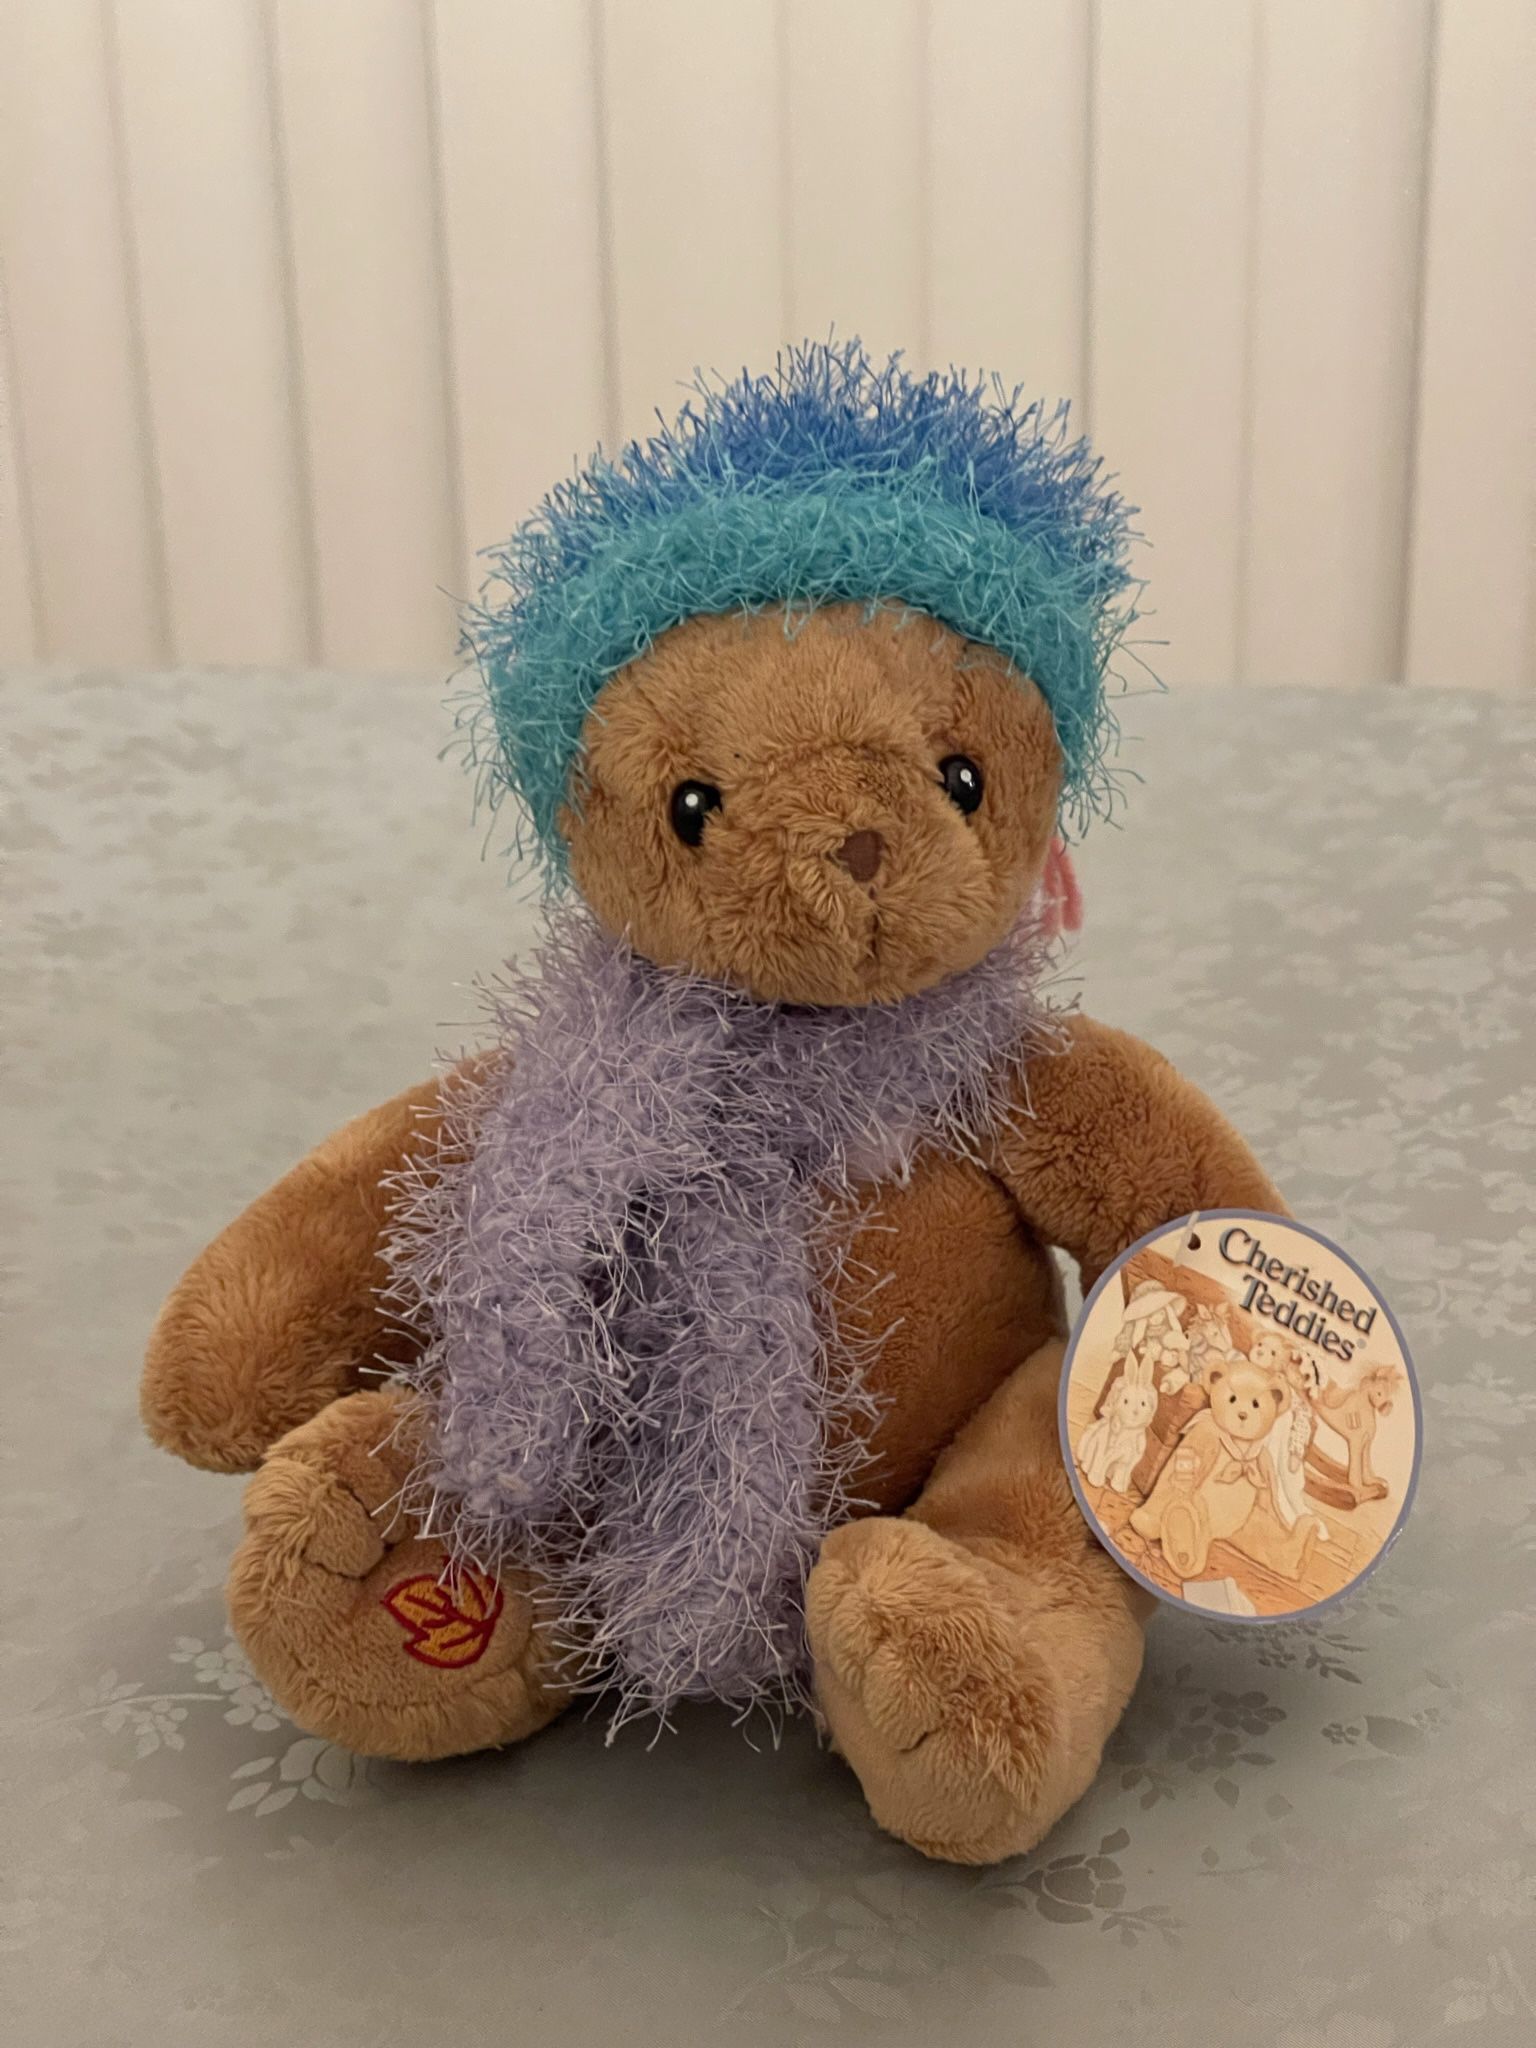 Cherished Teddy with fuzzy hat and scarf, heart on chest and leaf stitched on foot  